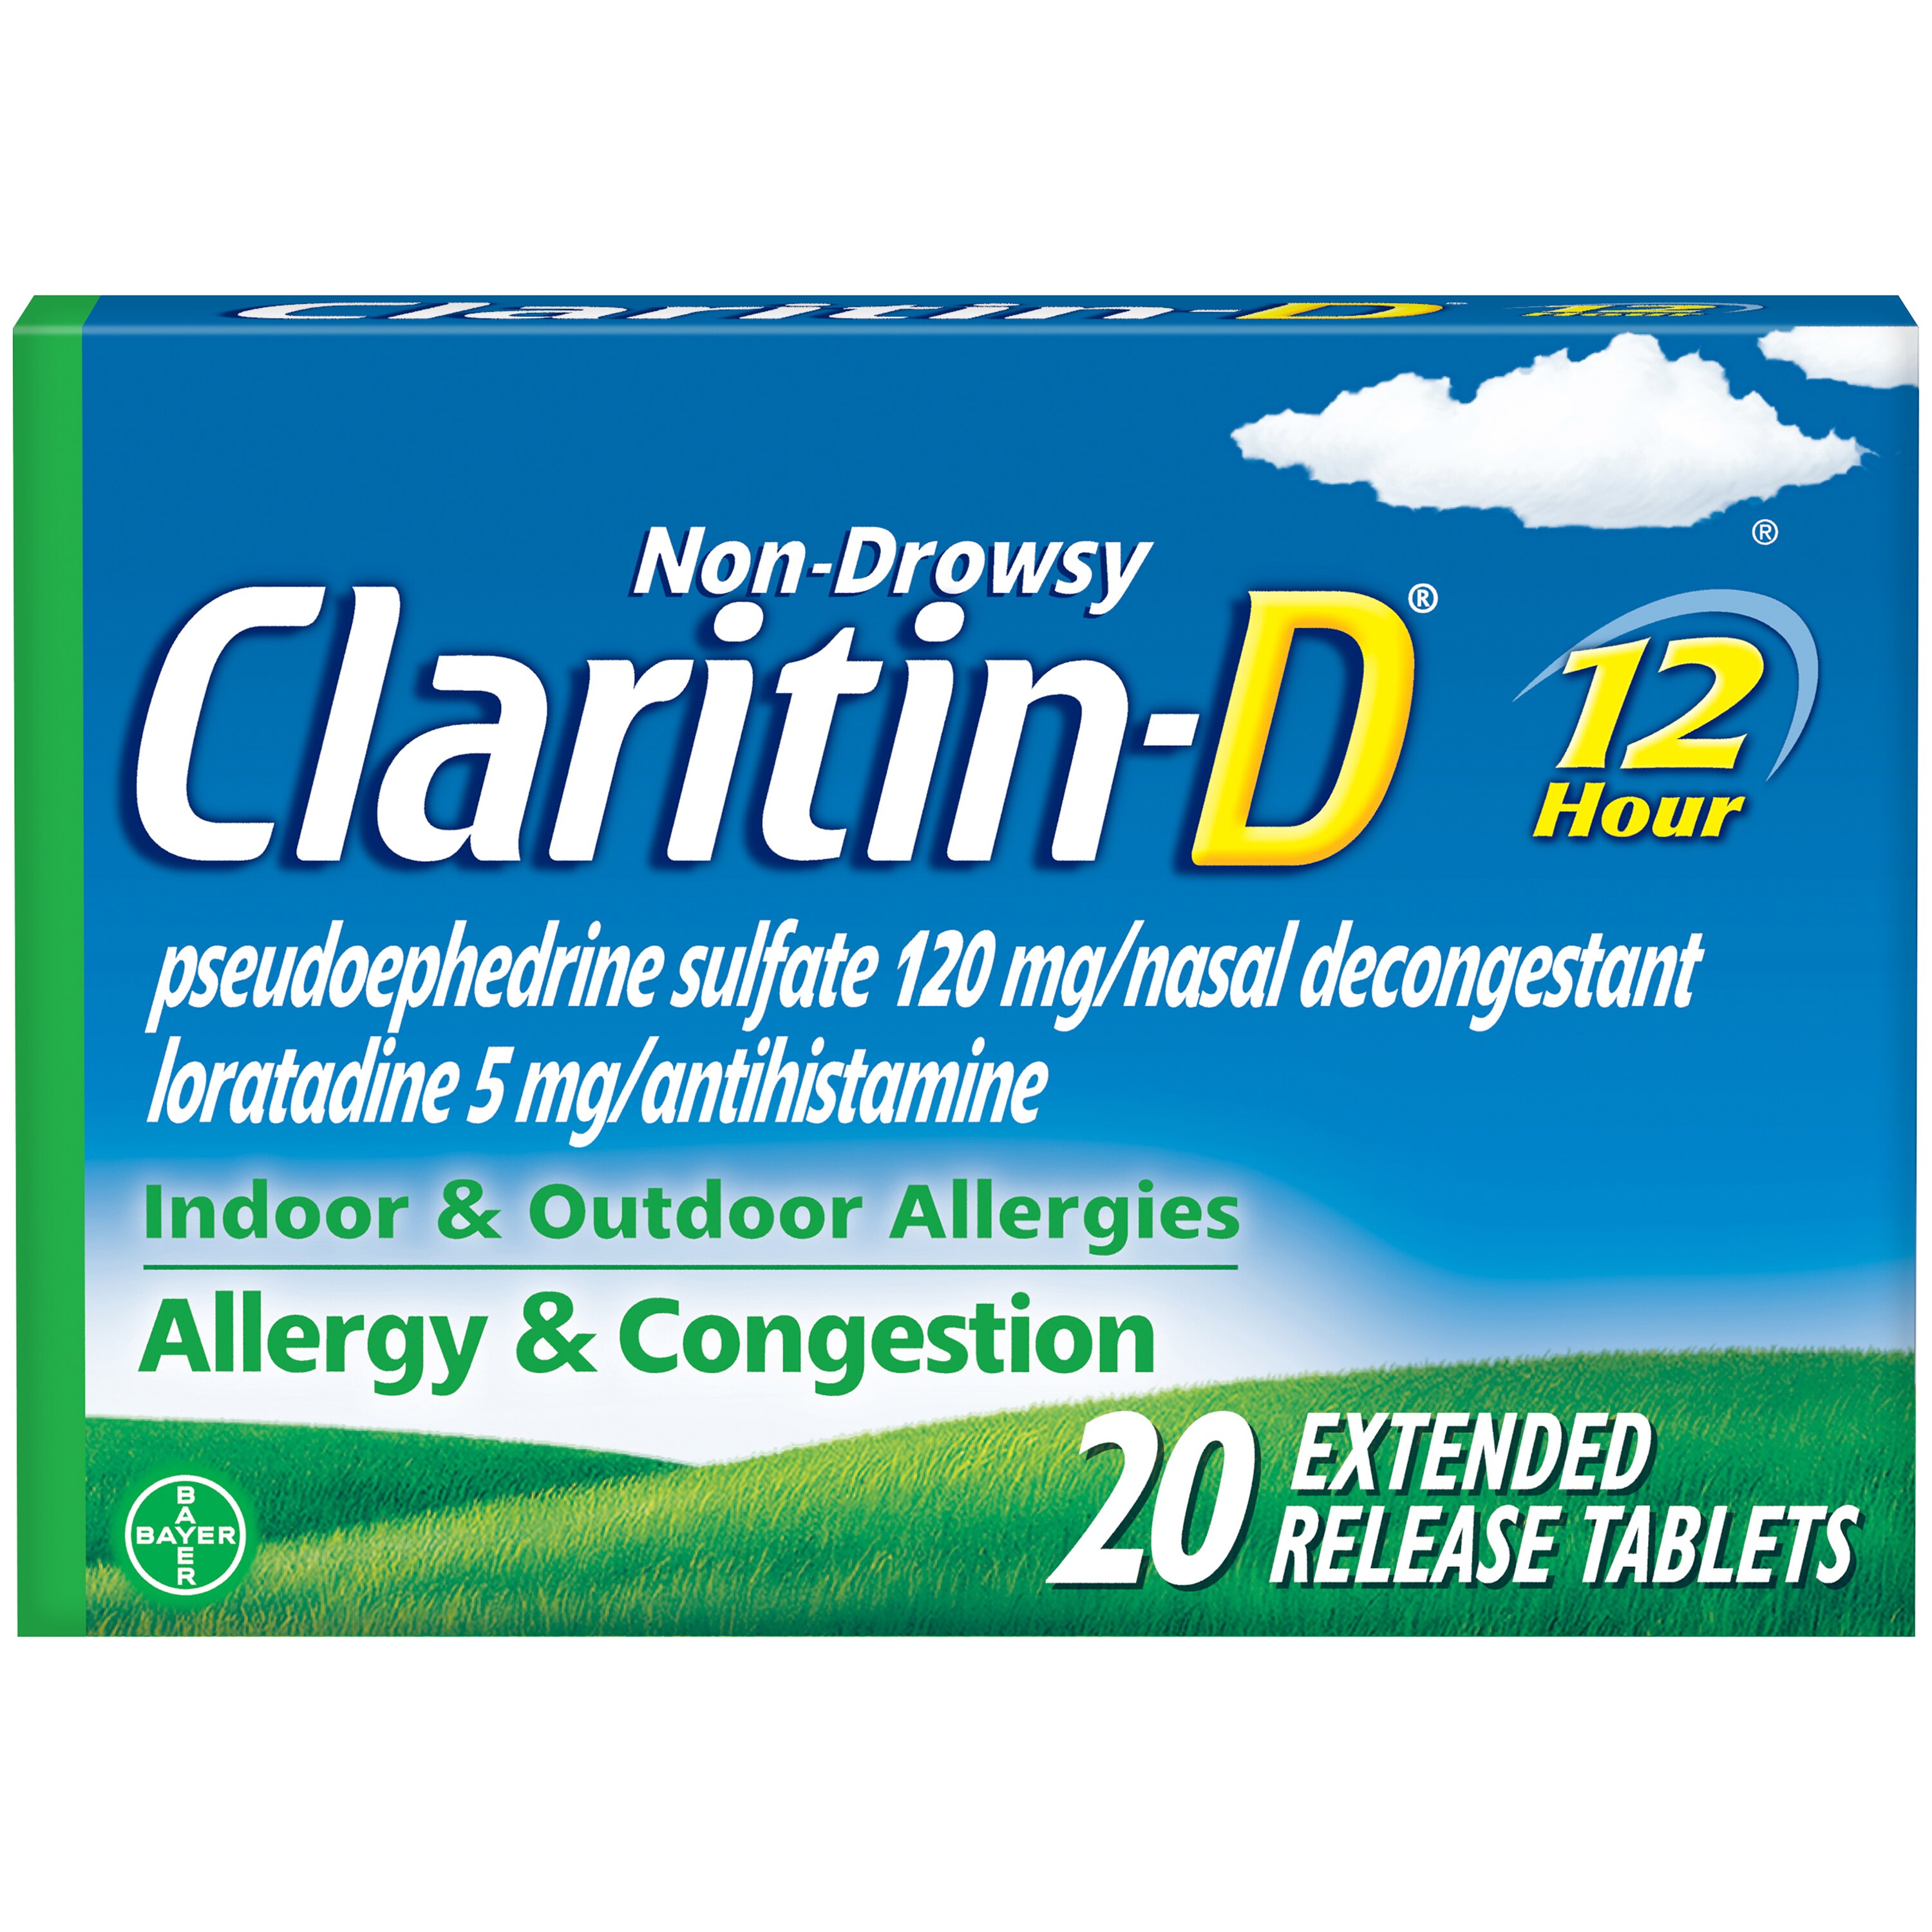 Claritin-D 12 Hour Non-Drowsy Allergy Medicine, Powerful Relief, Nasal Congestion & Sinus Pressure Relief, Indoor And Outdoor Allergy Relief, 20 Ct